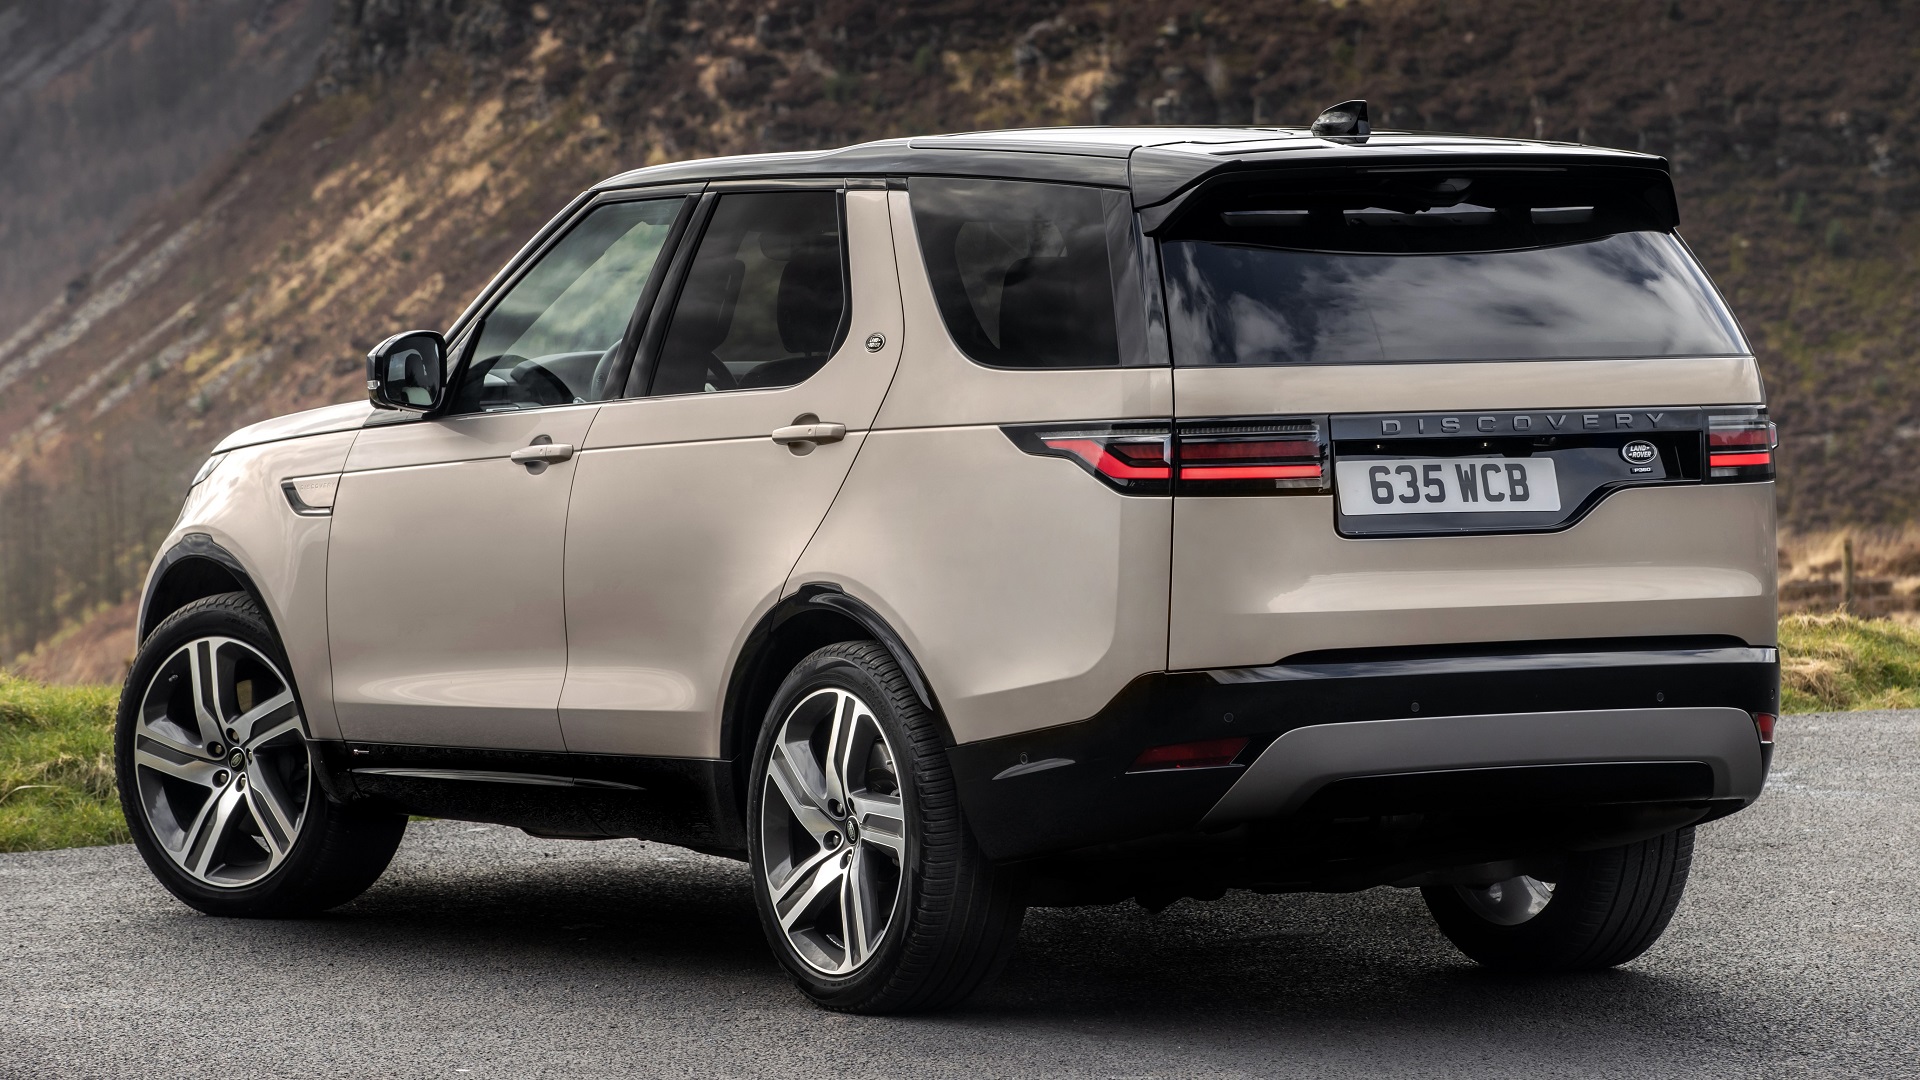 Land Rover Drives In The New Discovery - CarSaar